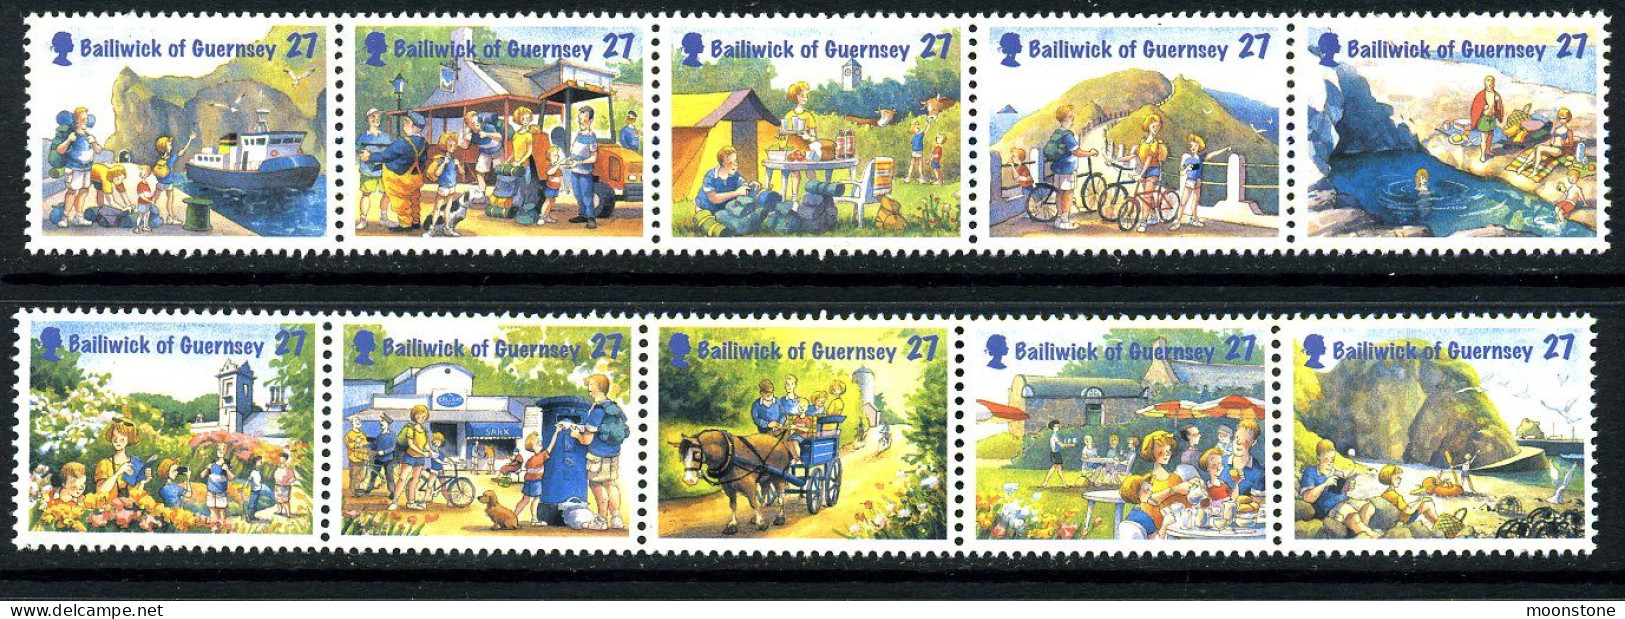 Guernsey 2002 Holidays On Sark Set Of 10, 2 Strips Of 5, MNH, SG 955/64 - Guernesey